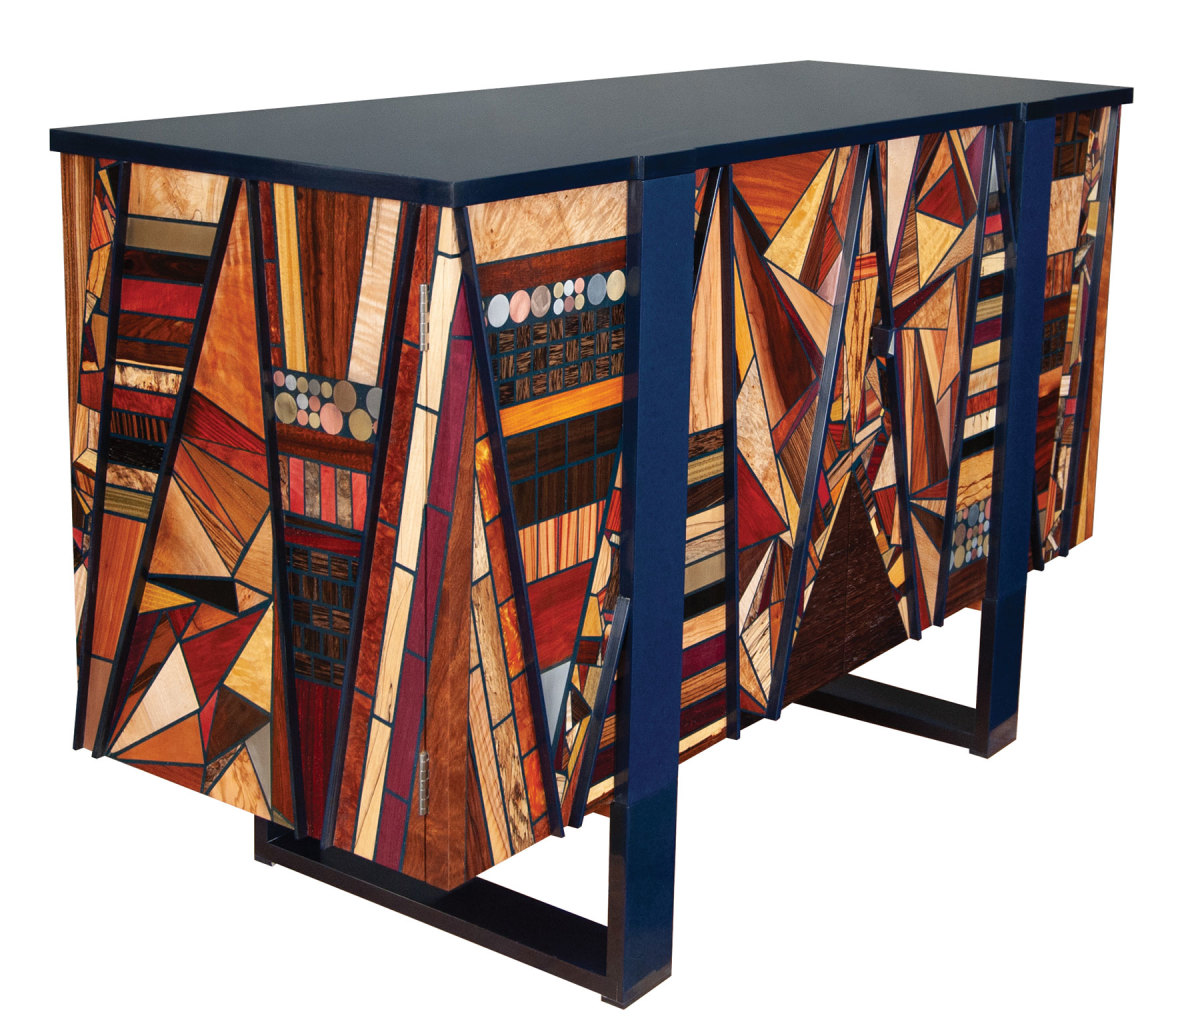 Three pieces at Western Design — Secret Spirits, Porta De Soul and Wild Blue — from MosArt Furniture in New Market, Md.